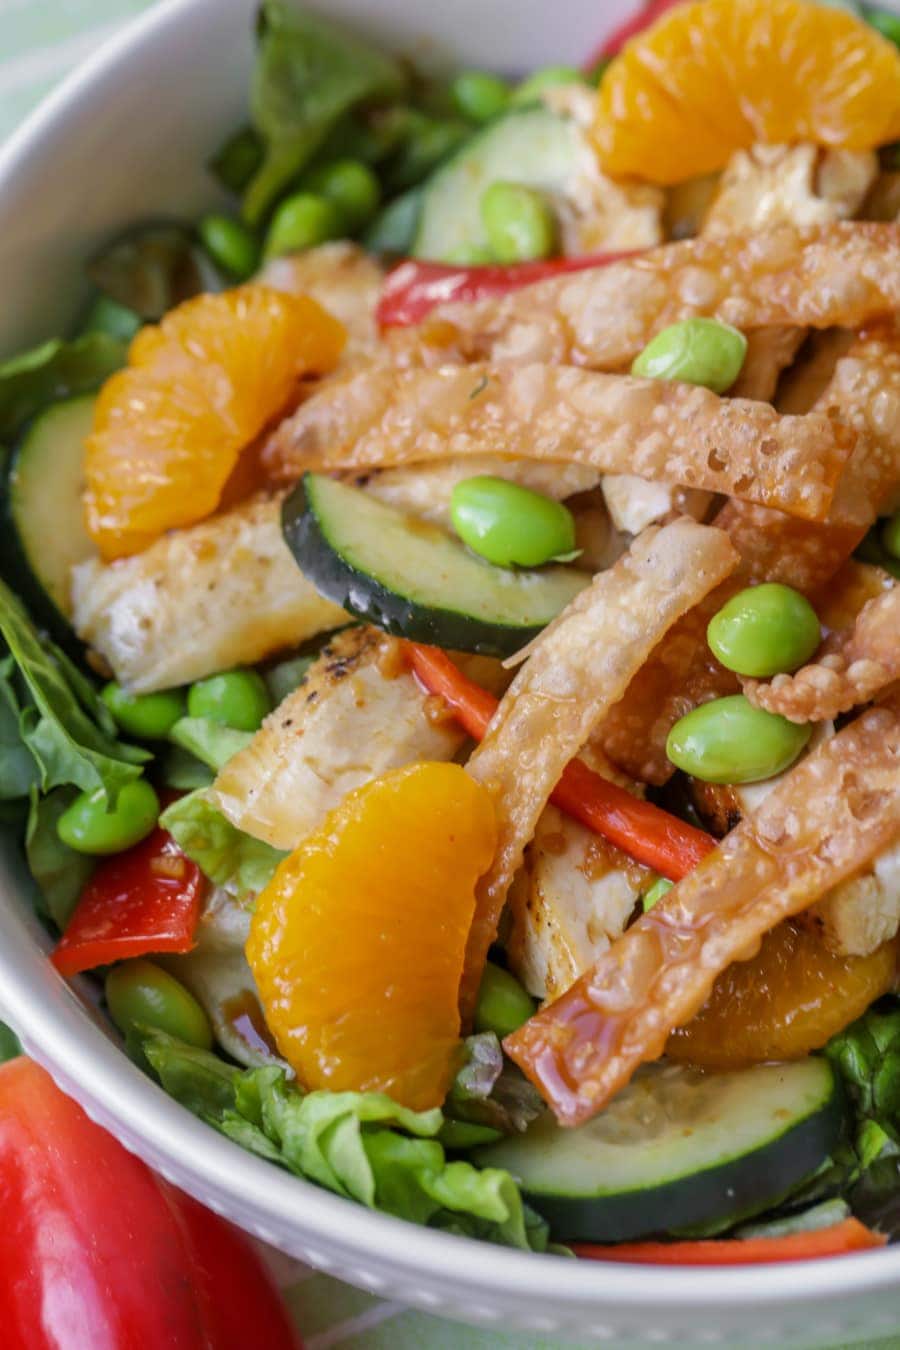 Green Salad Recipes - Asian citrus chicken salad in a white bowl.